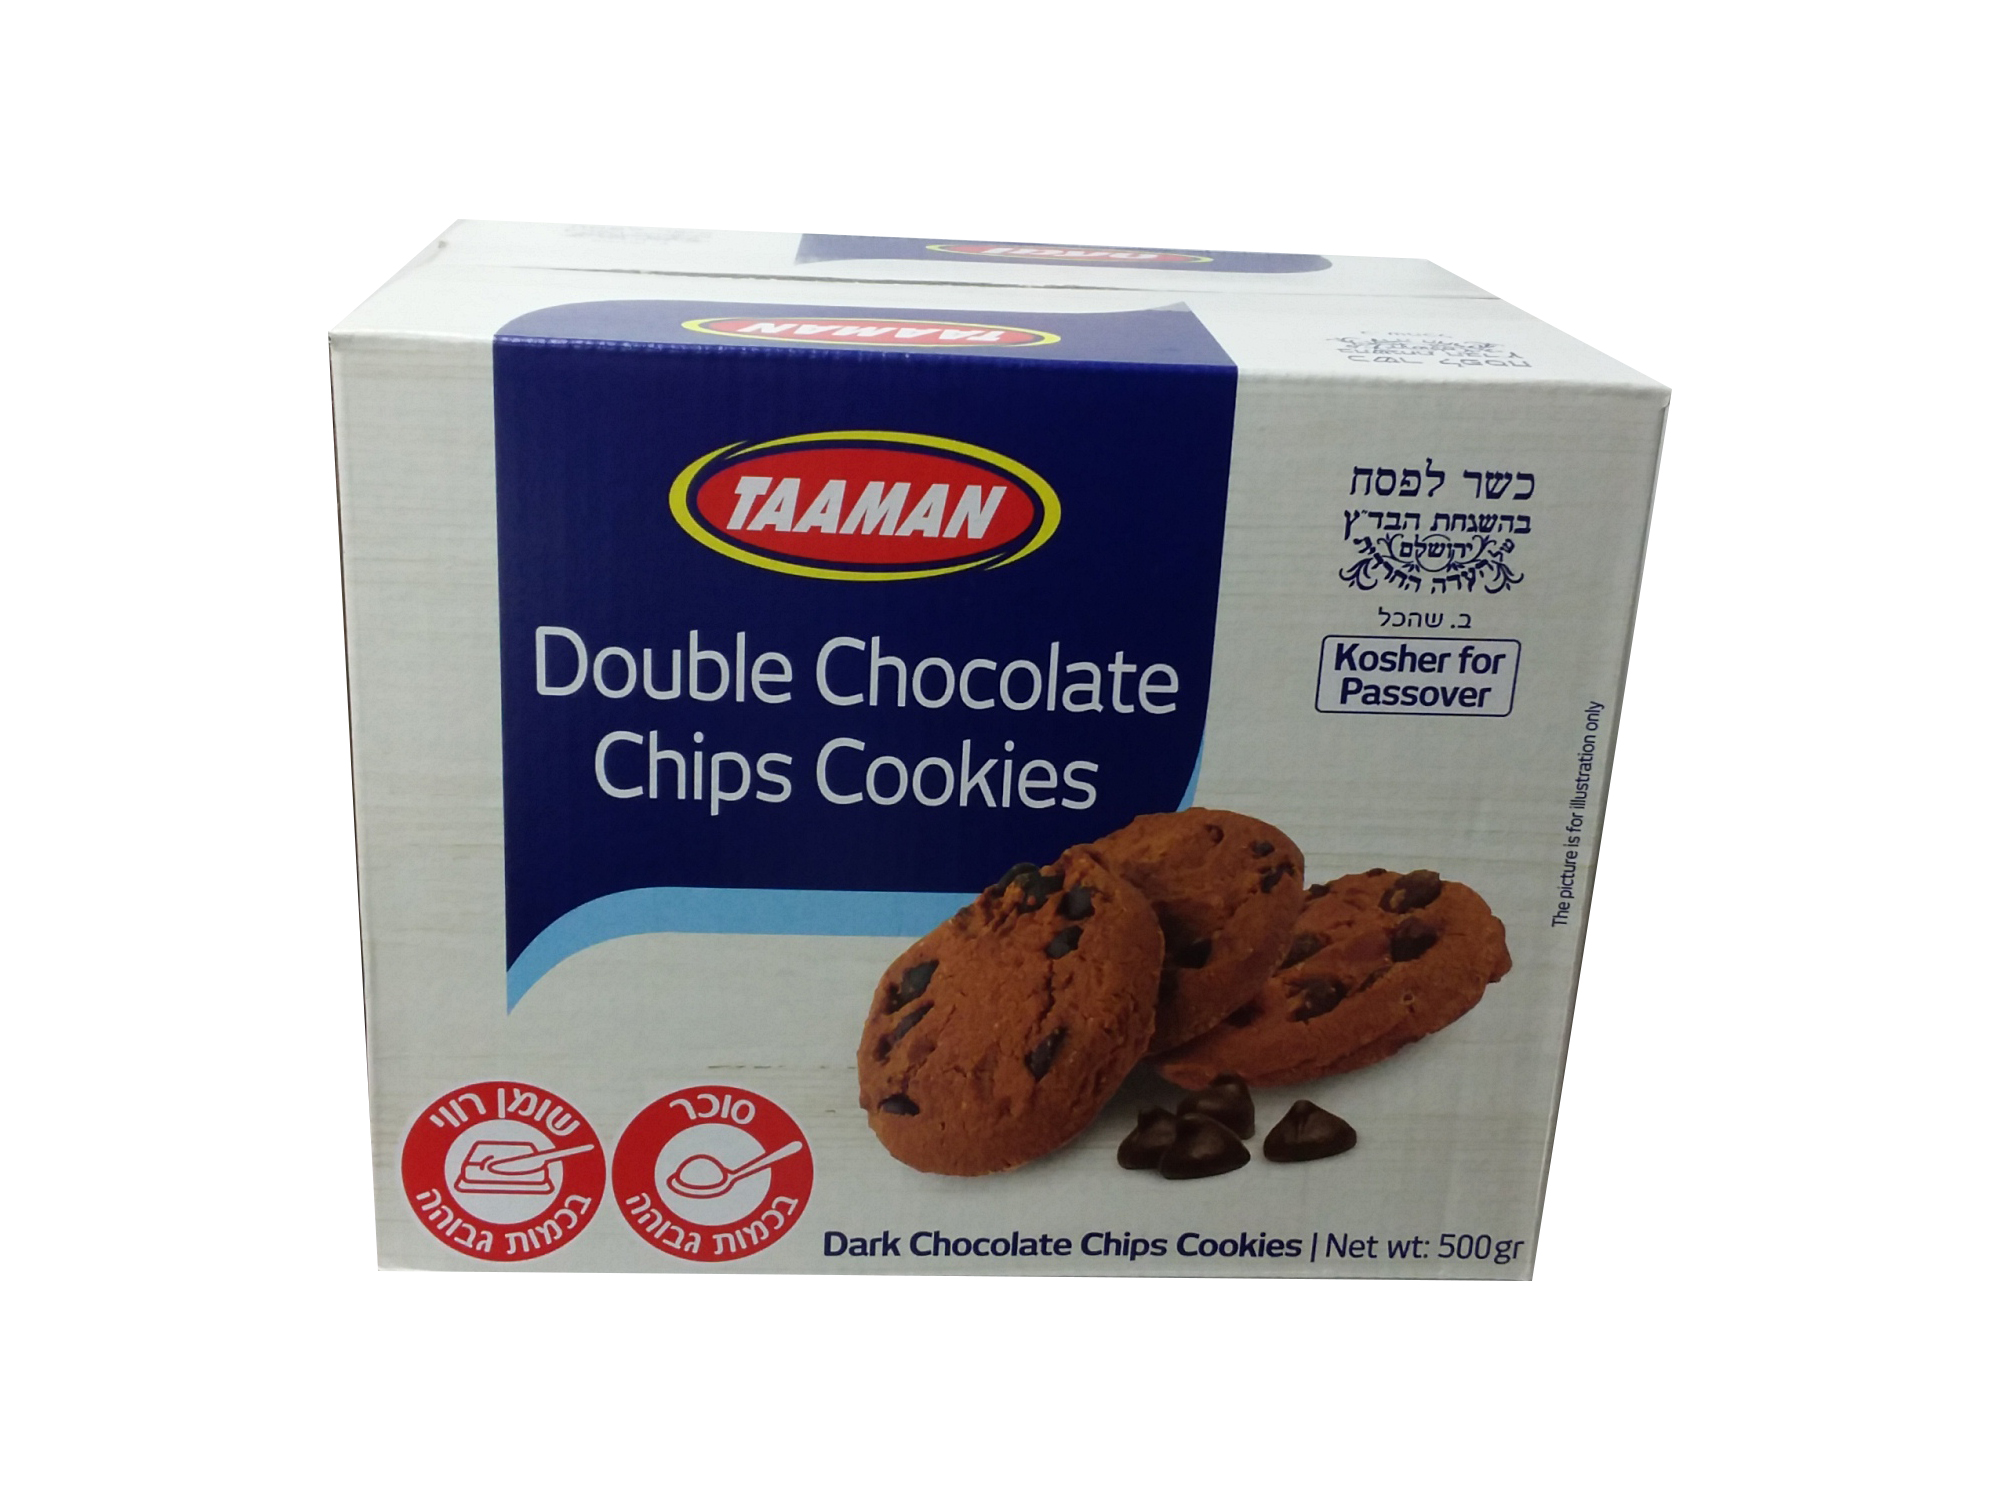 TAAMAN DOUBLE CHOCOLATE CHIP COOKIES